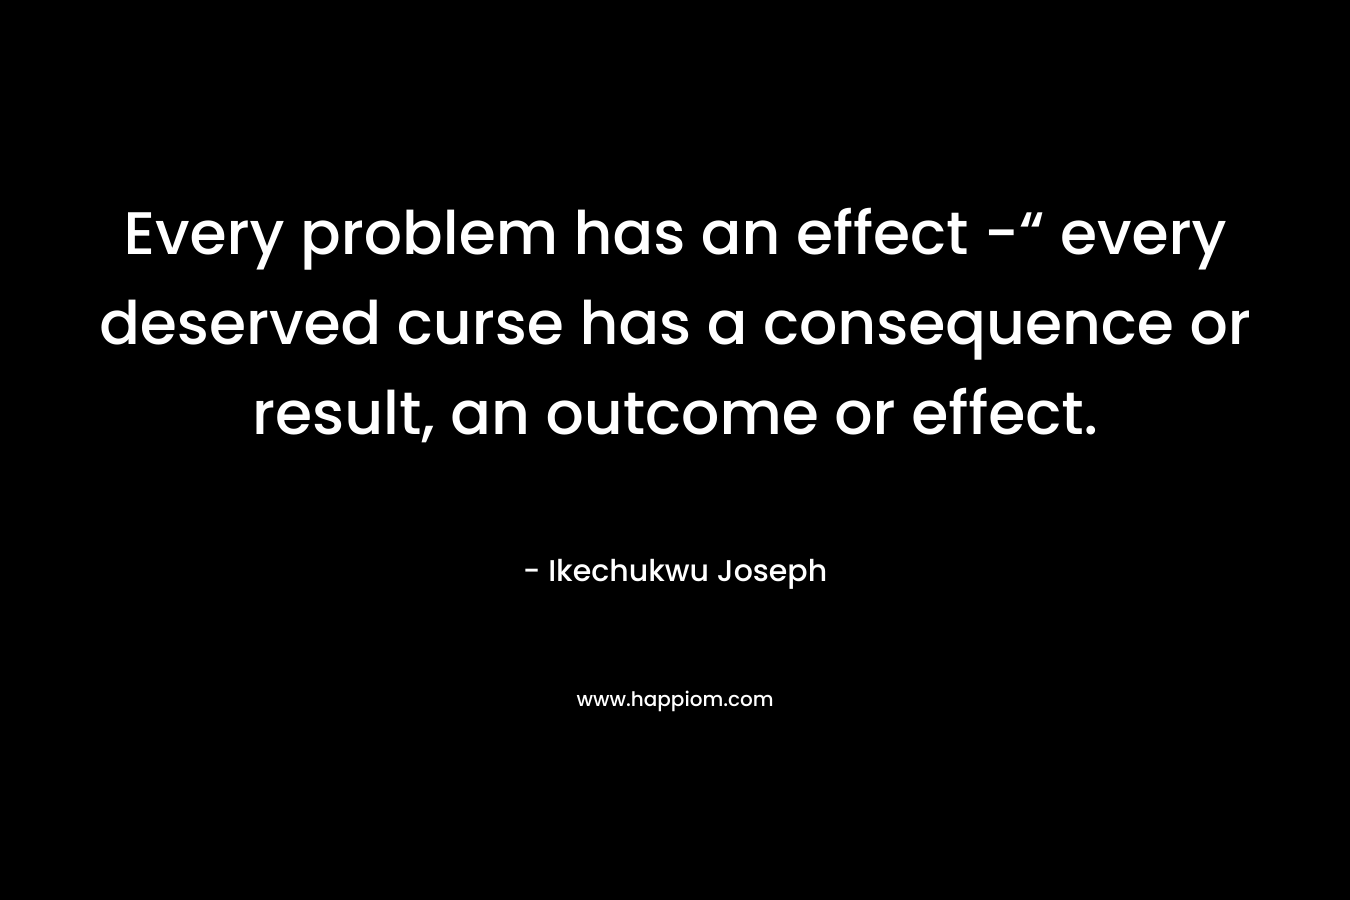 Every problem has an effect -“ every deserved curse has a consequence or result, an outcome or effect.